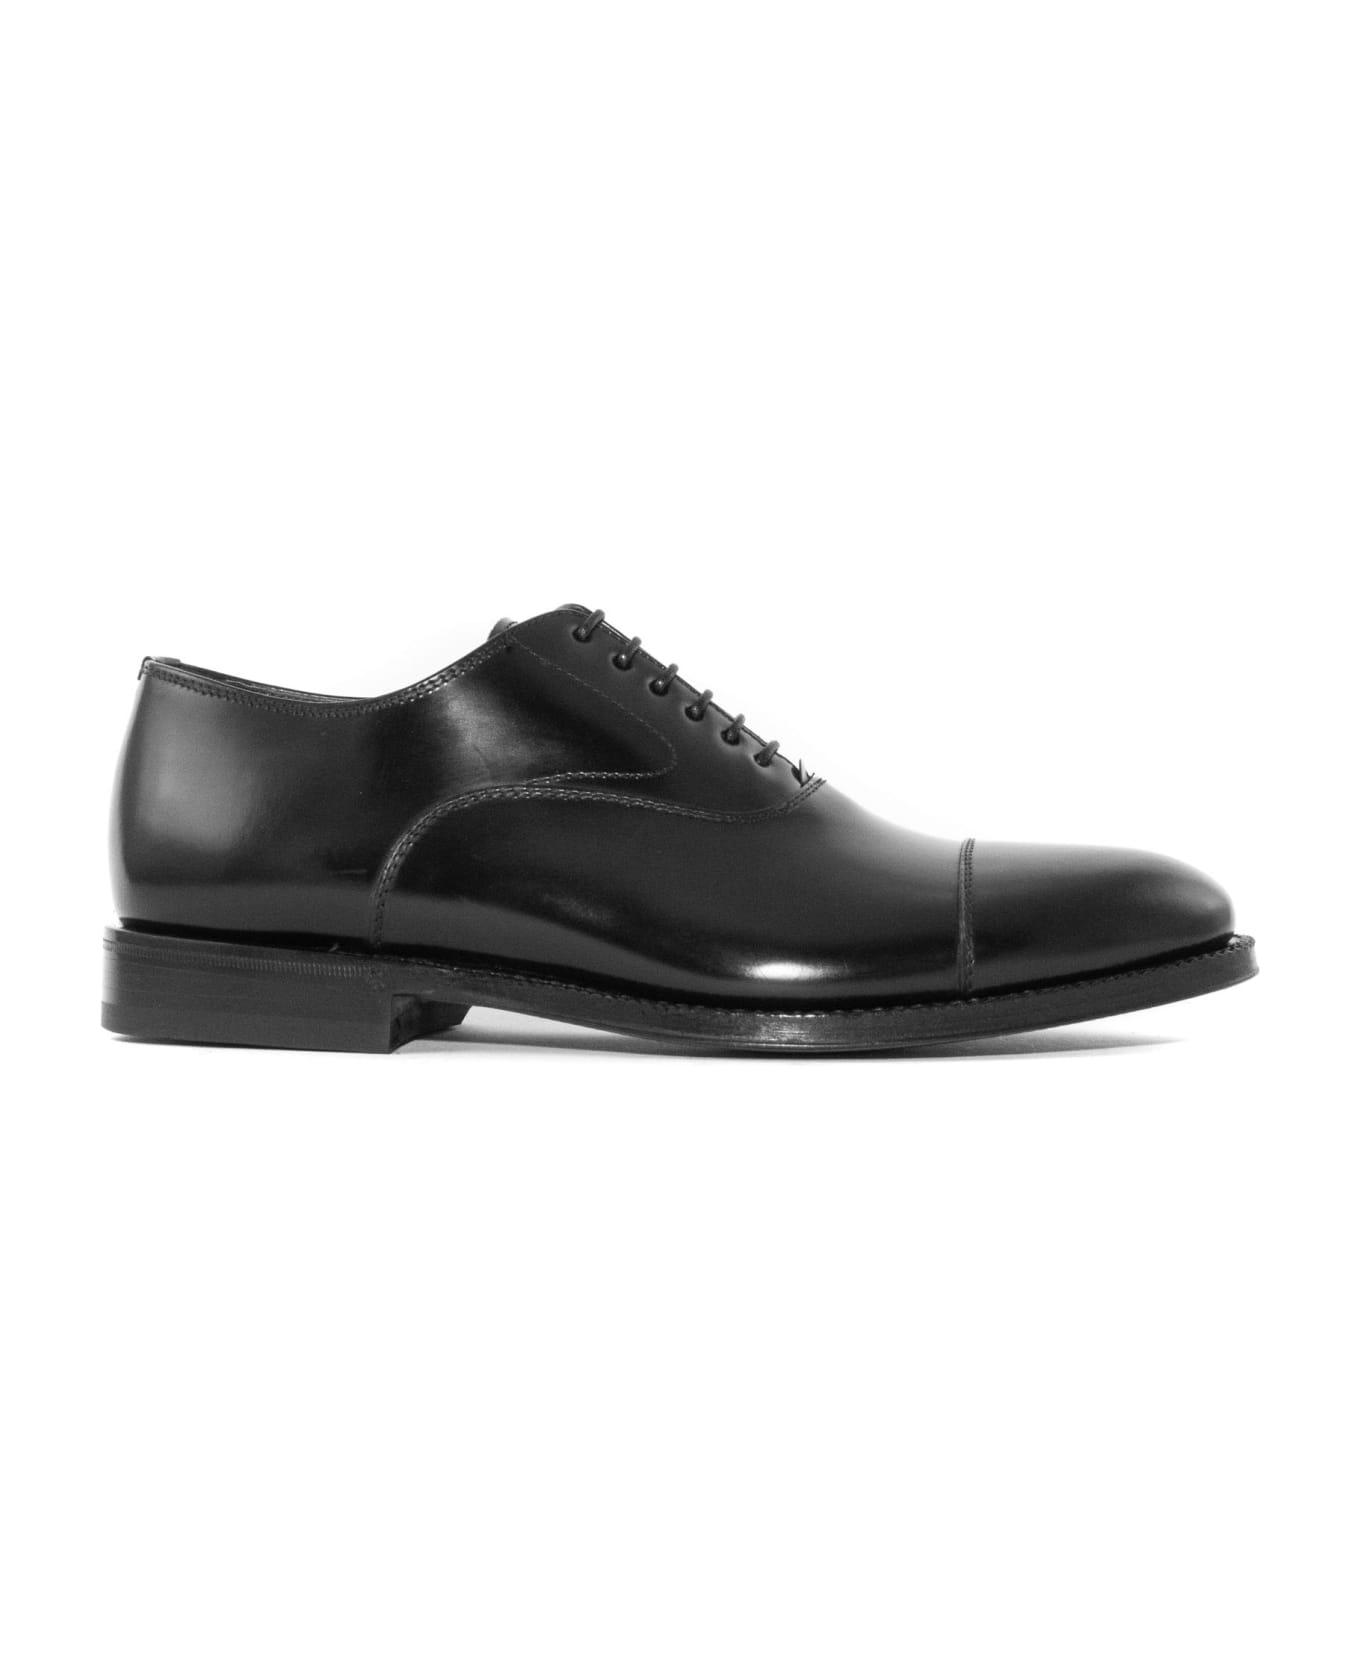 Green George Black Brushed Leather Oxford Shoes - Black